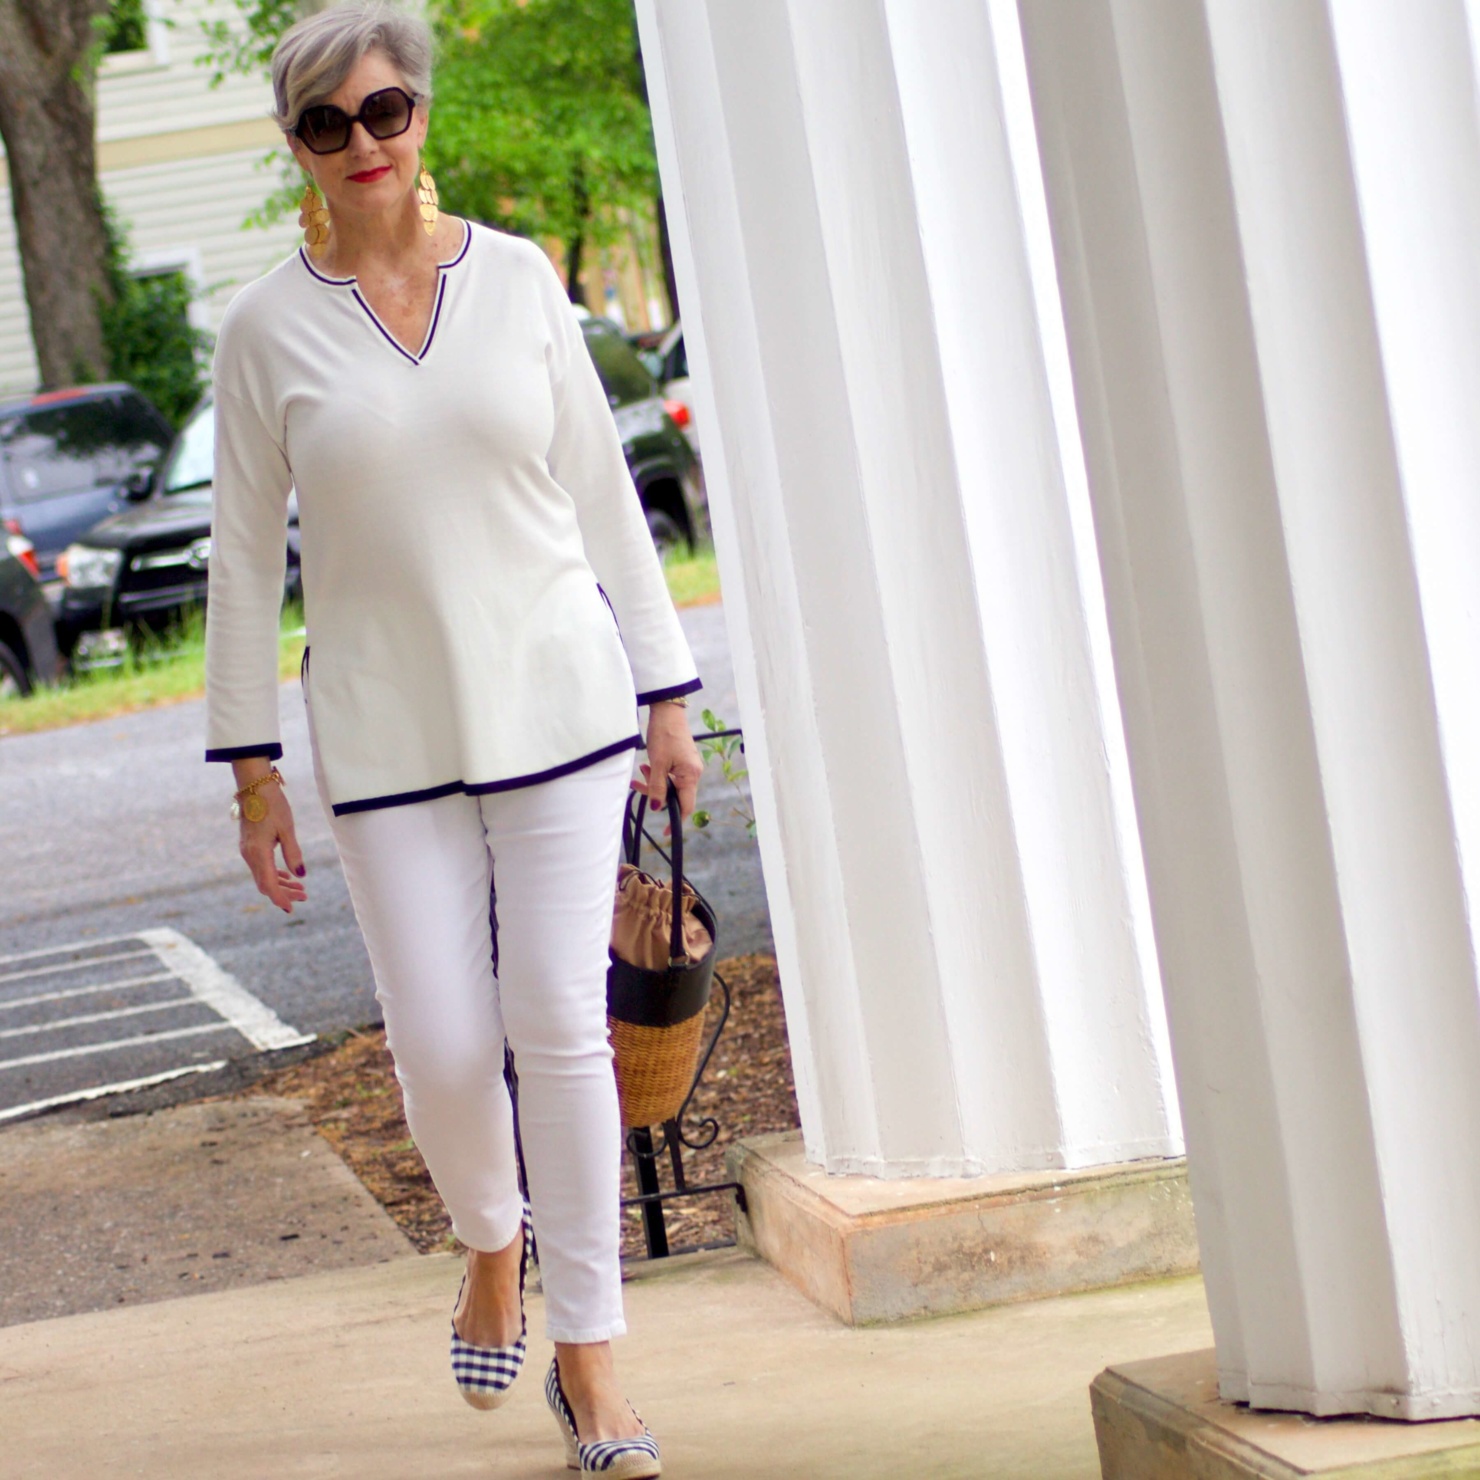 beth from Style at a Certain Age wears a monochromatic white outfit. white tunic trimmed in blue, white jeans and gingham espadrilles